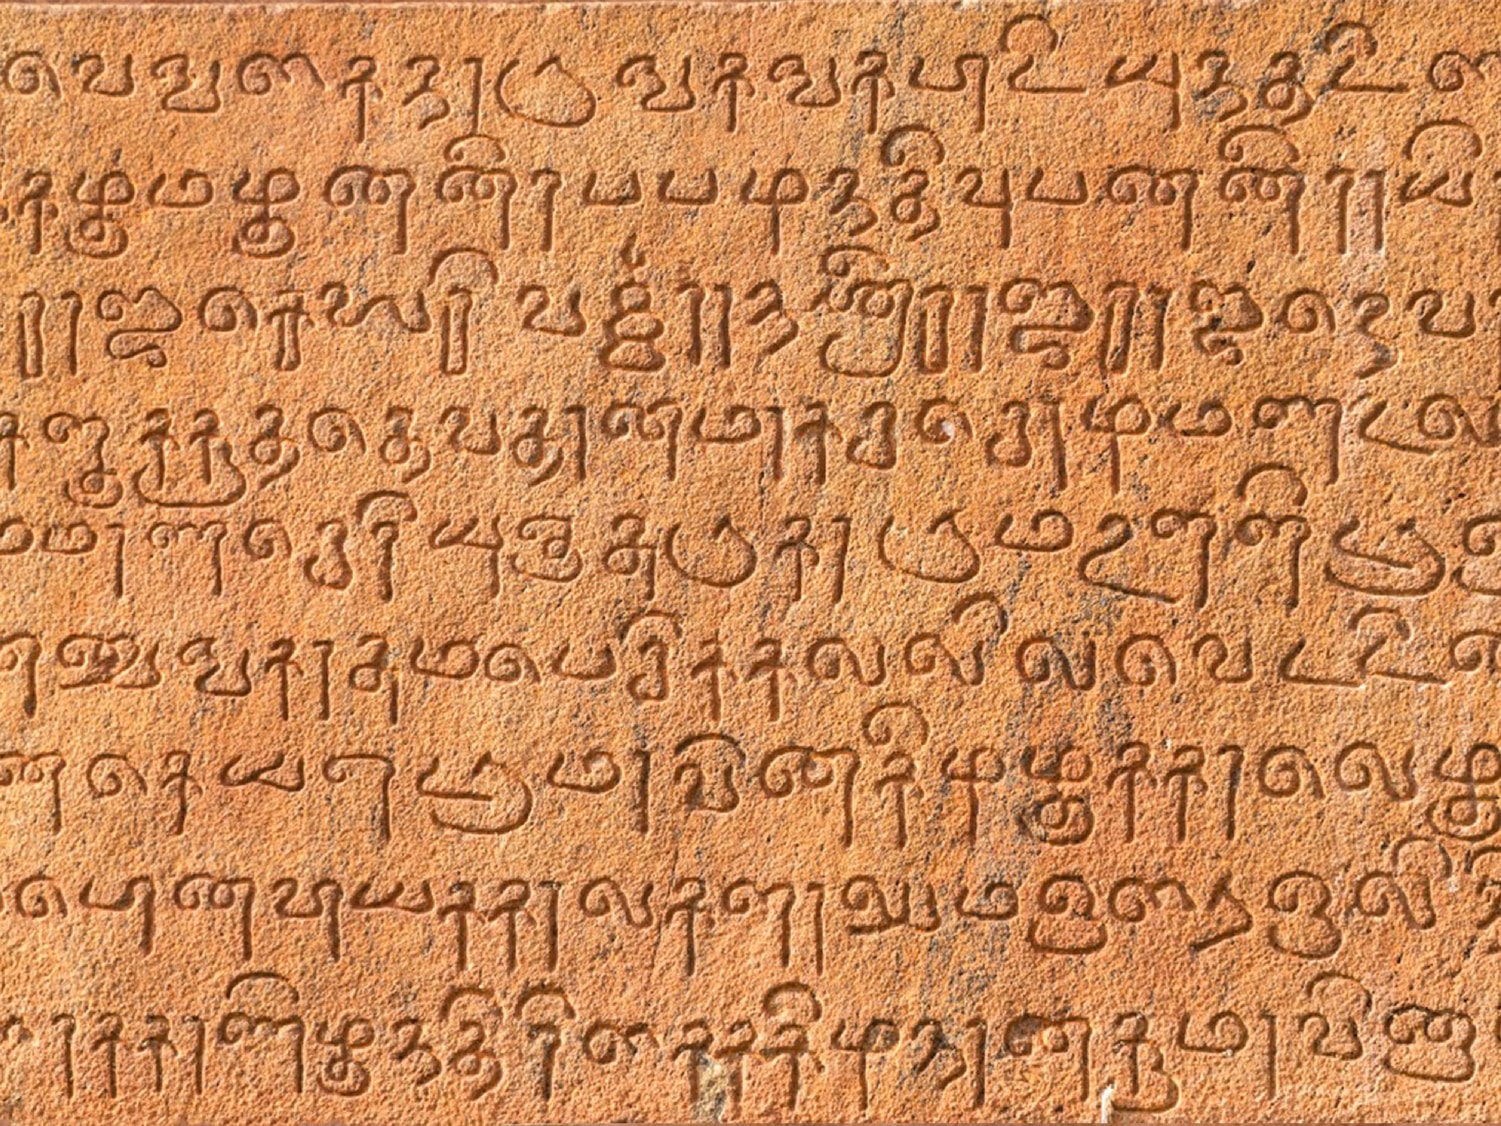 Chola inscription in Tamil from the 12th century C.E